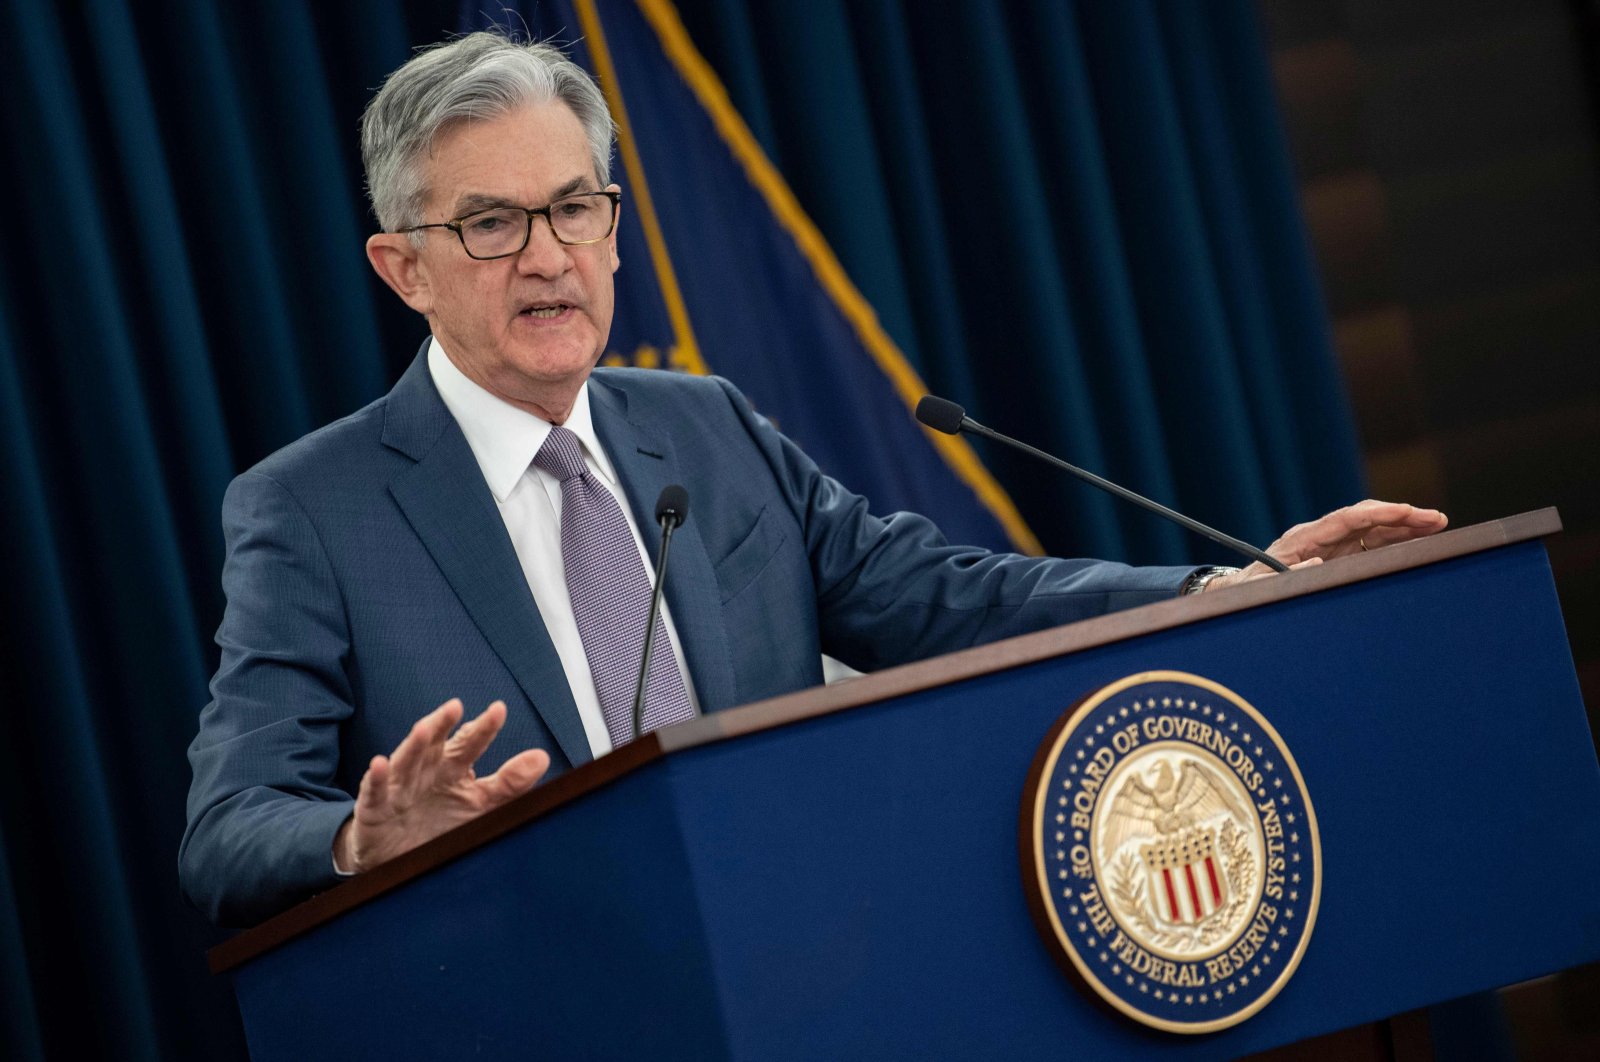 US Federal Reserve Chairman Jerome Powell gives a press briefing after the surprise announcement the FED will cut interest rates on March 3, 2020 in Washington,DC. (AFP Photo)